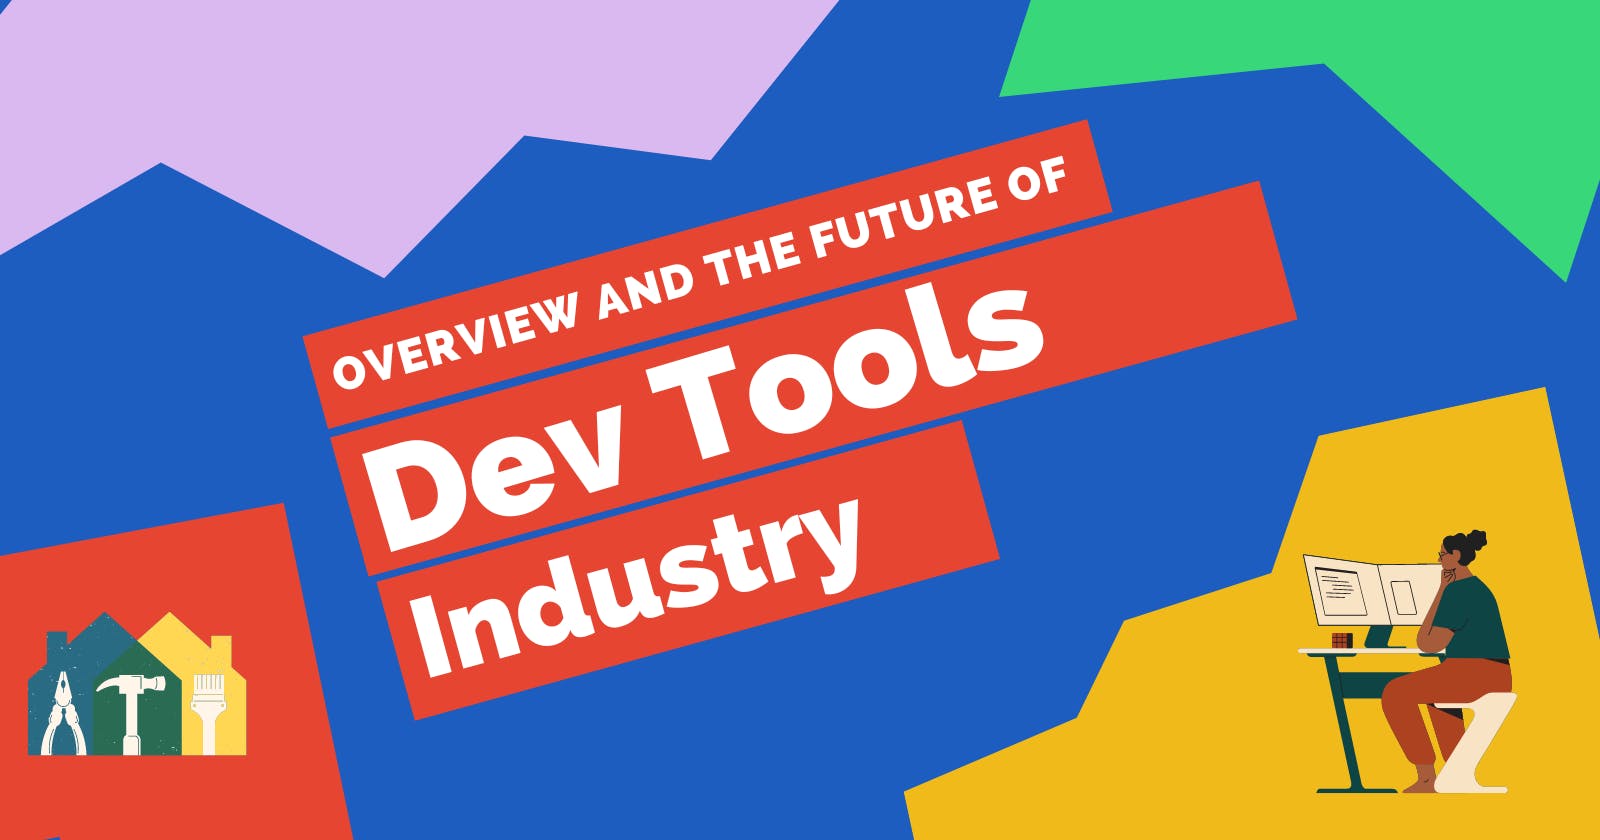 Overview and the future of Dev Tools Industry